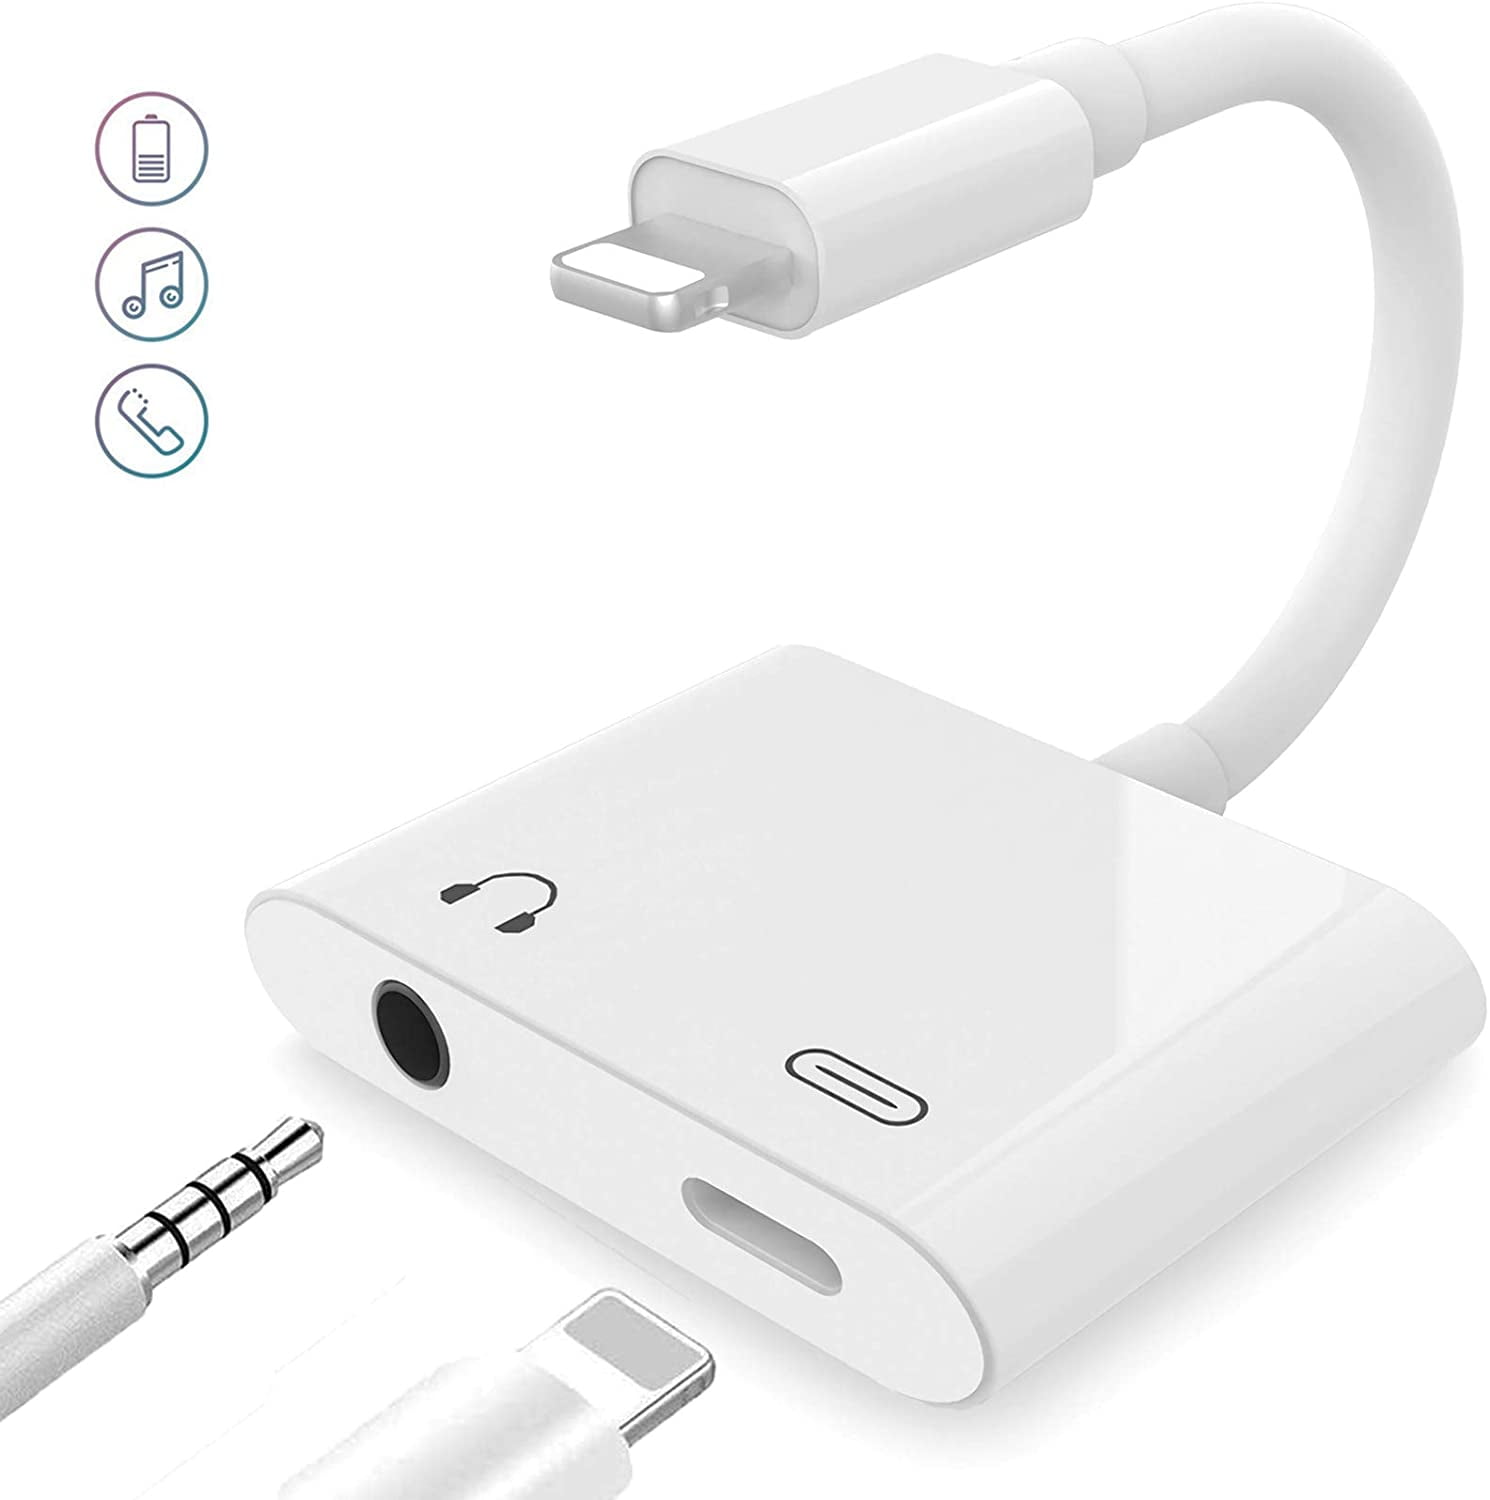 Headphone Jack Splitter Adapter for iPhone Adapter AUX Audio & Charger & Call & sync Cable for iPhone 7 8 X Xs XS Max Earphone Converter Double Dongle Connector Cable Higher and IP Headset for iOS 12 